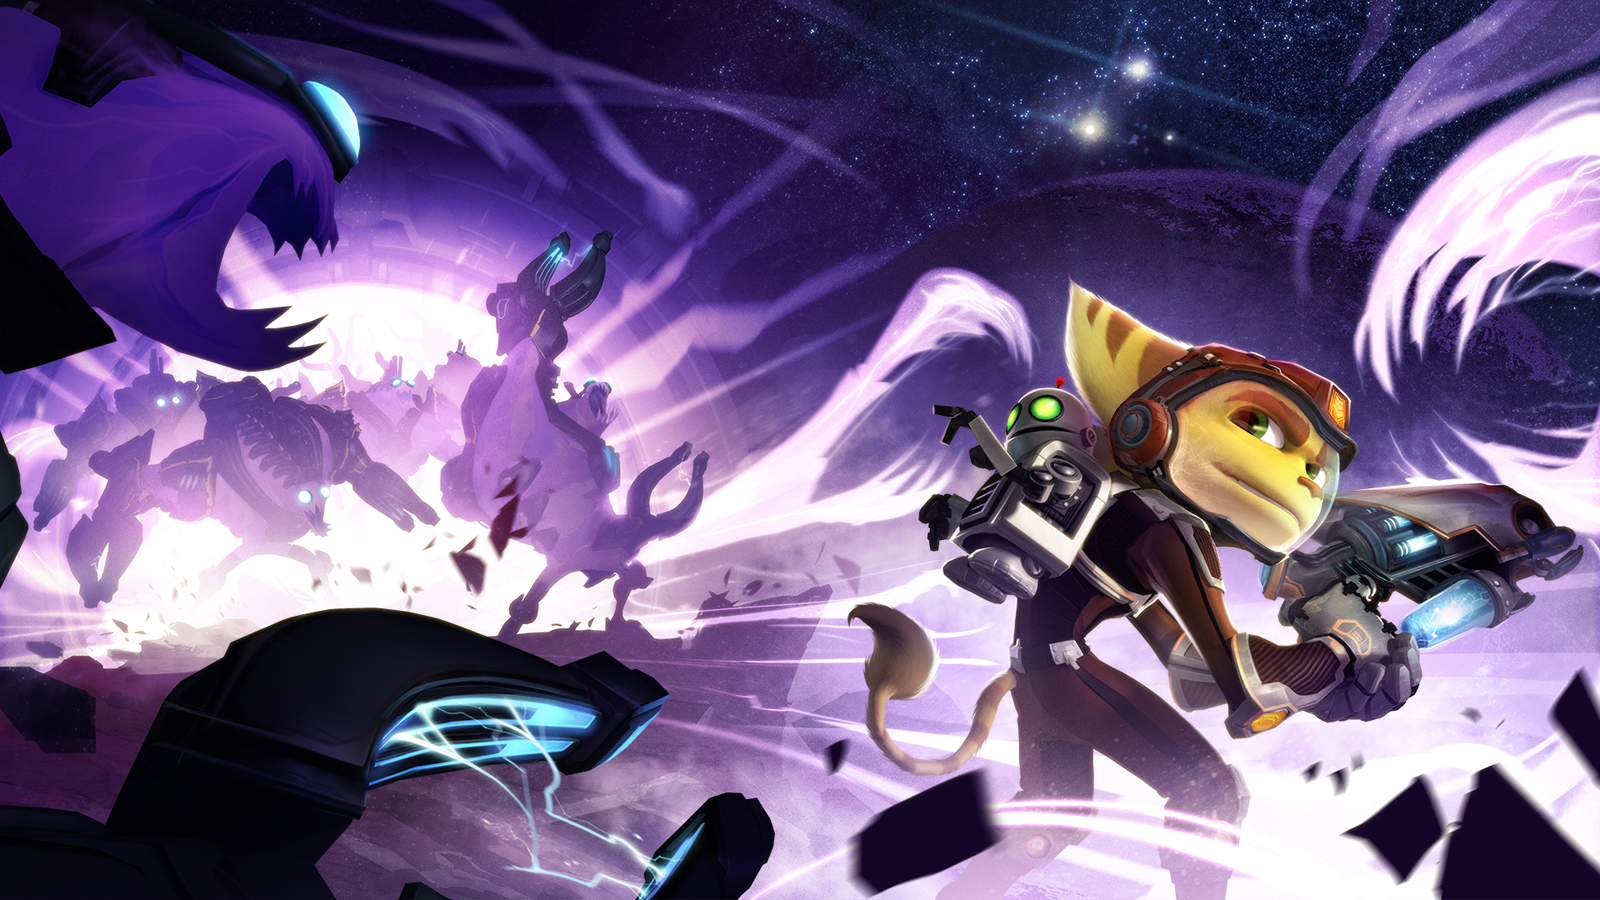 Wallpapers  Ratchet  Clank Into The Nexus  PS3  Ratchet Galaxy